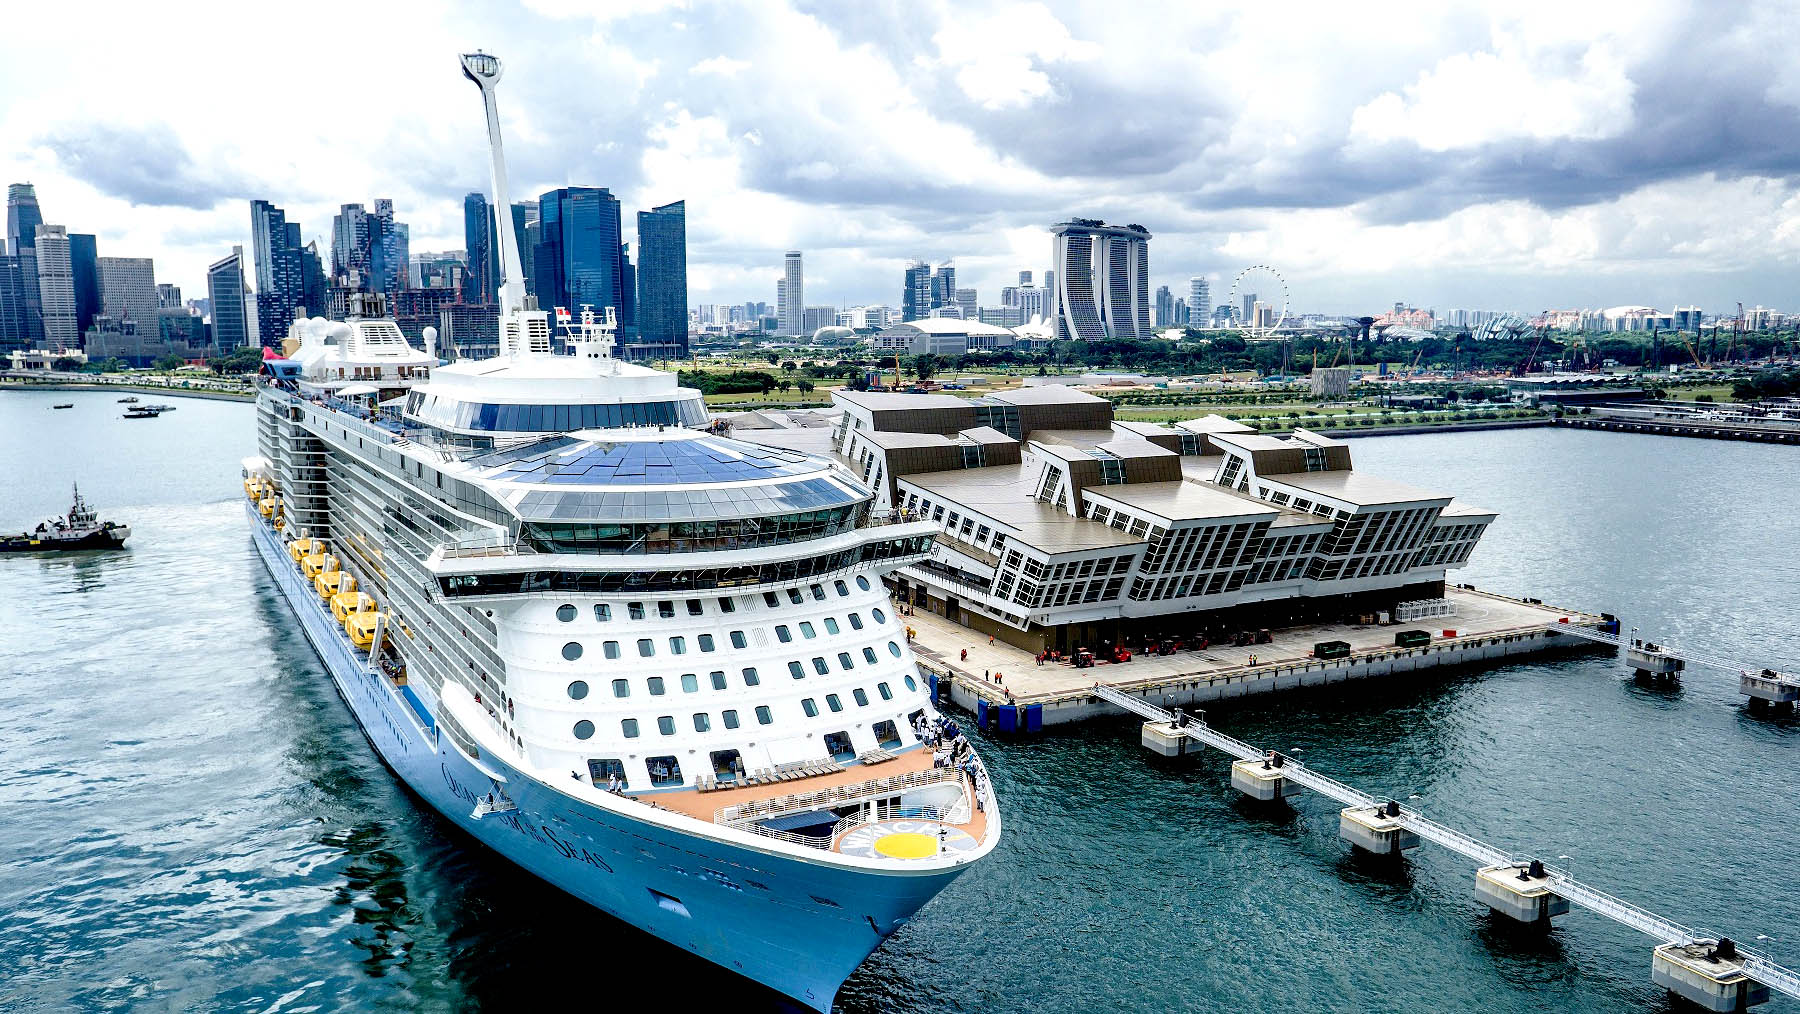 Royal Caribbean's Quantum of the Seas in Singapore as part of the line's Southeast Asia cruises.